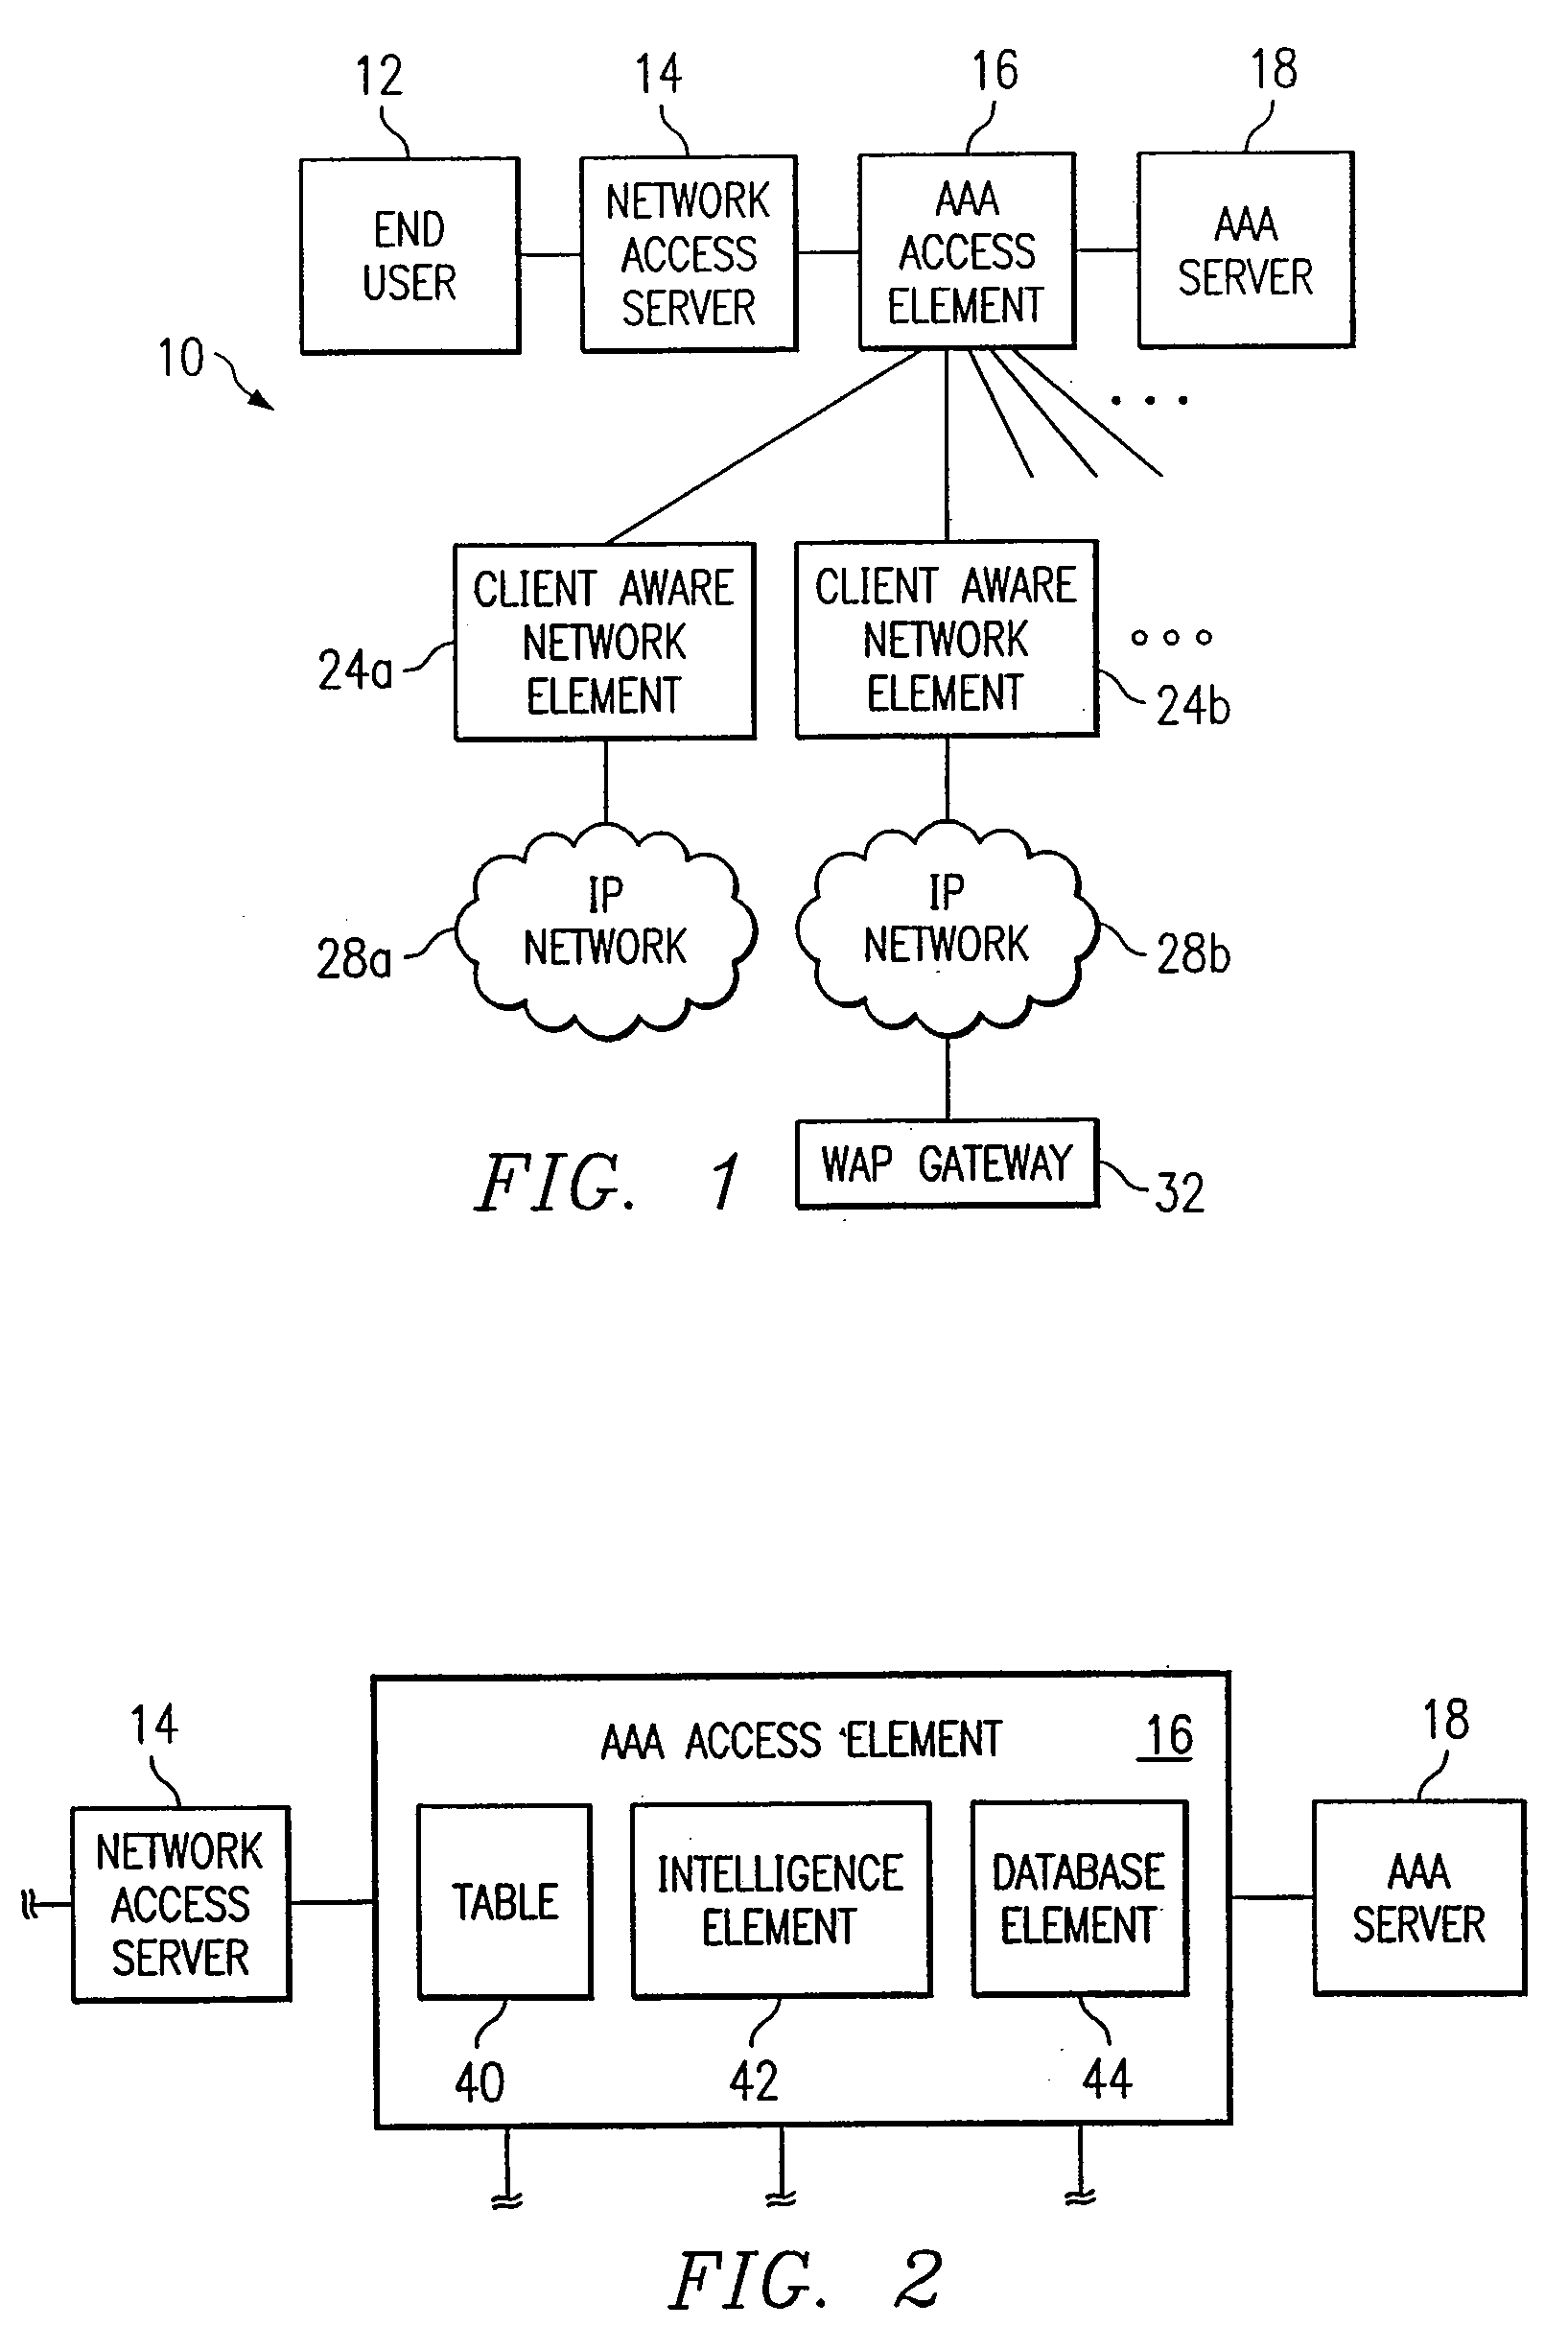 System and Method for Monitoring Information in a Network Environment